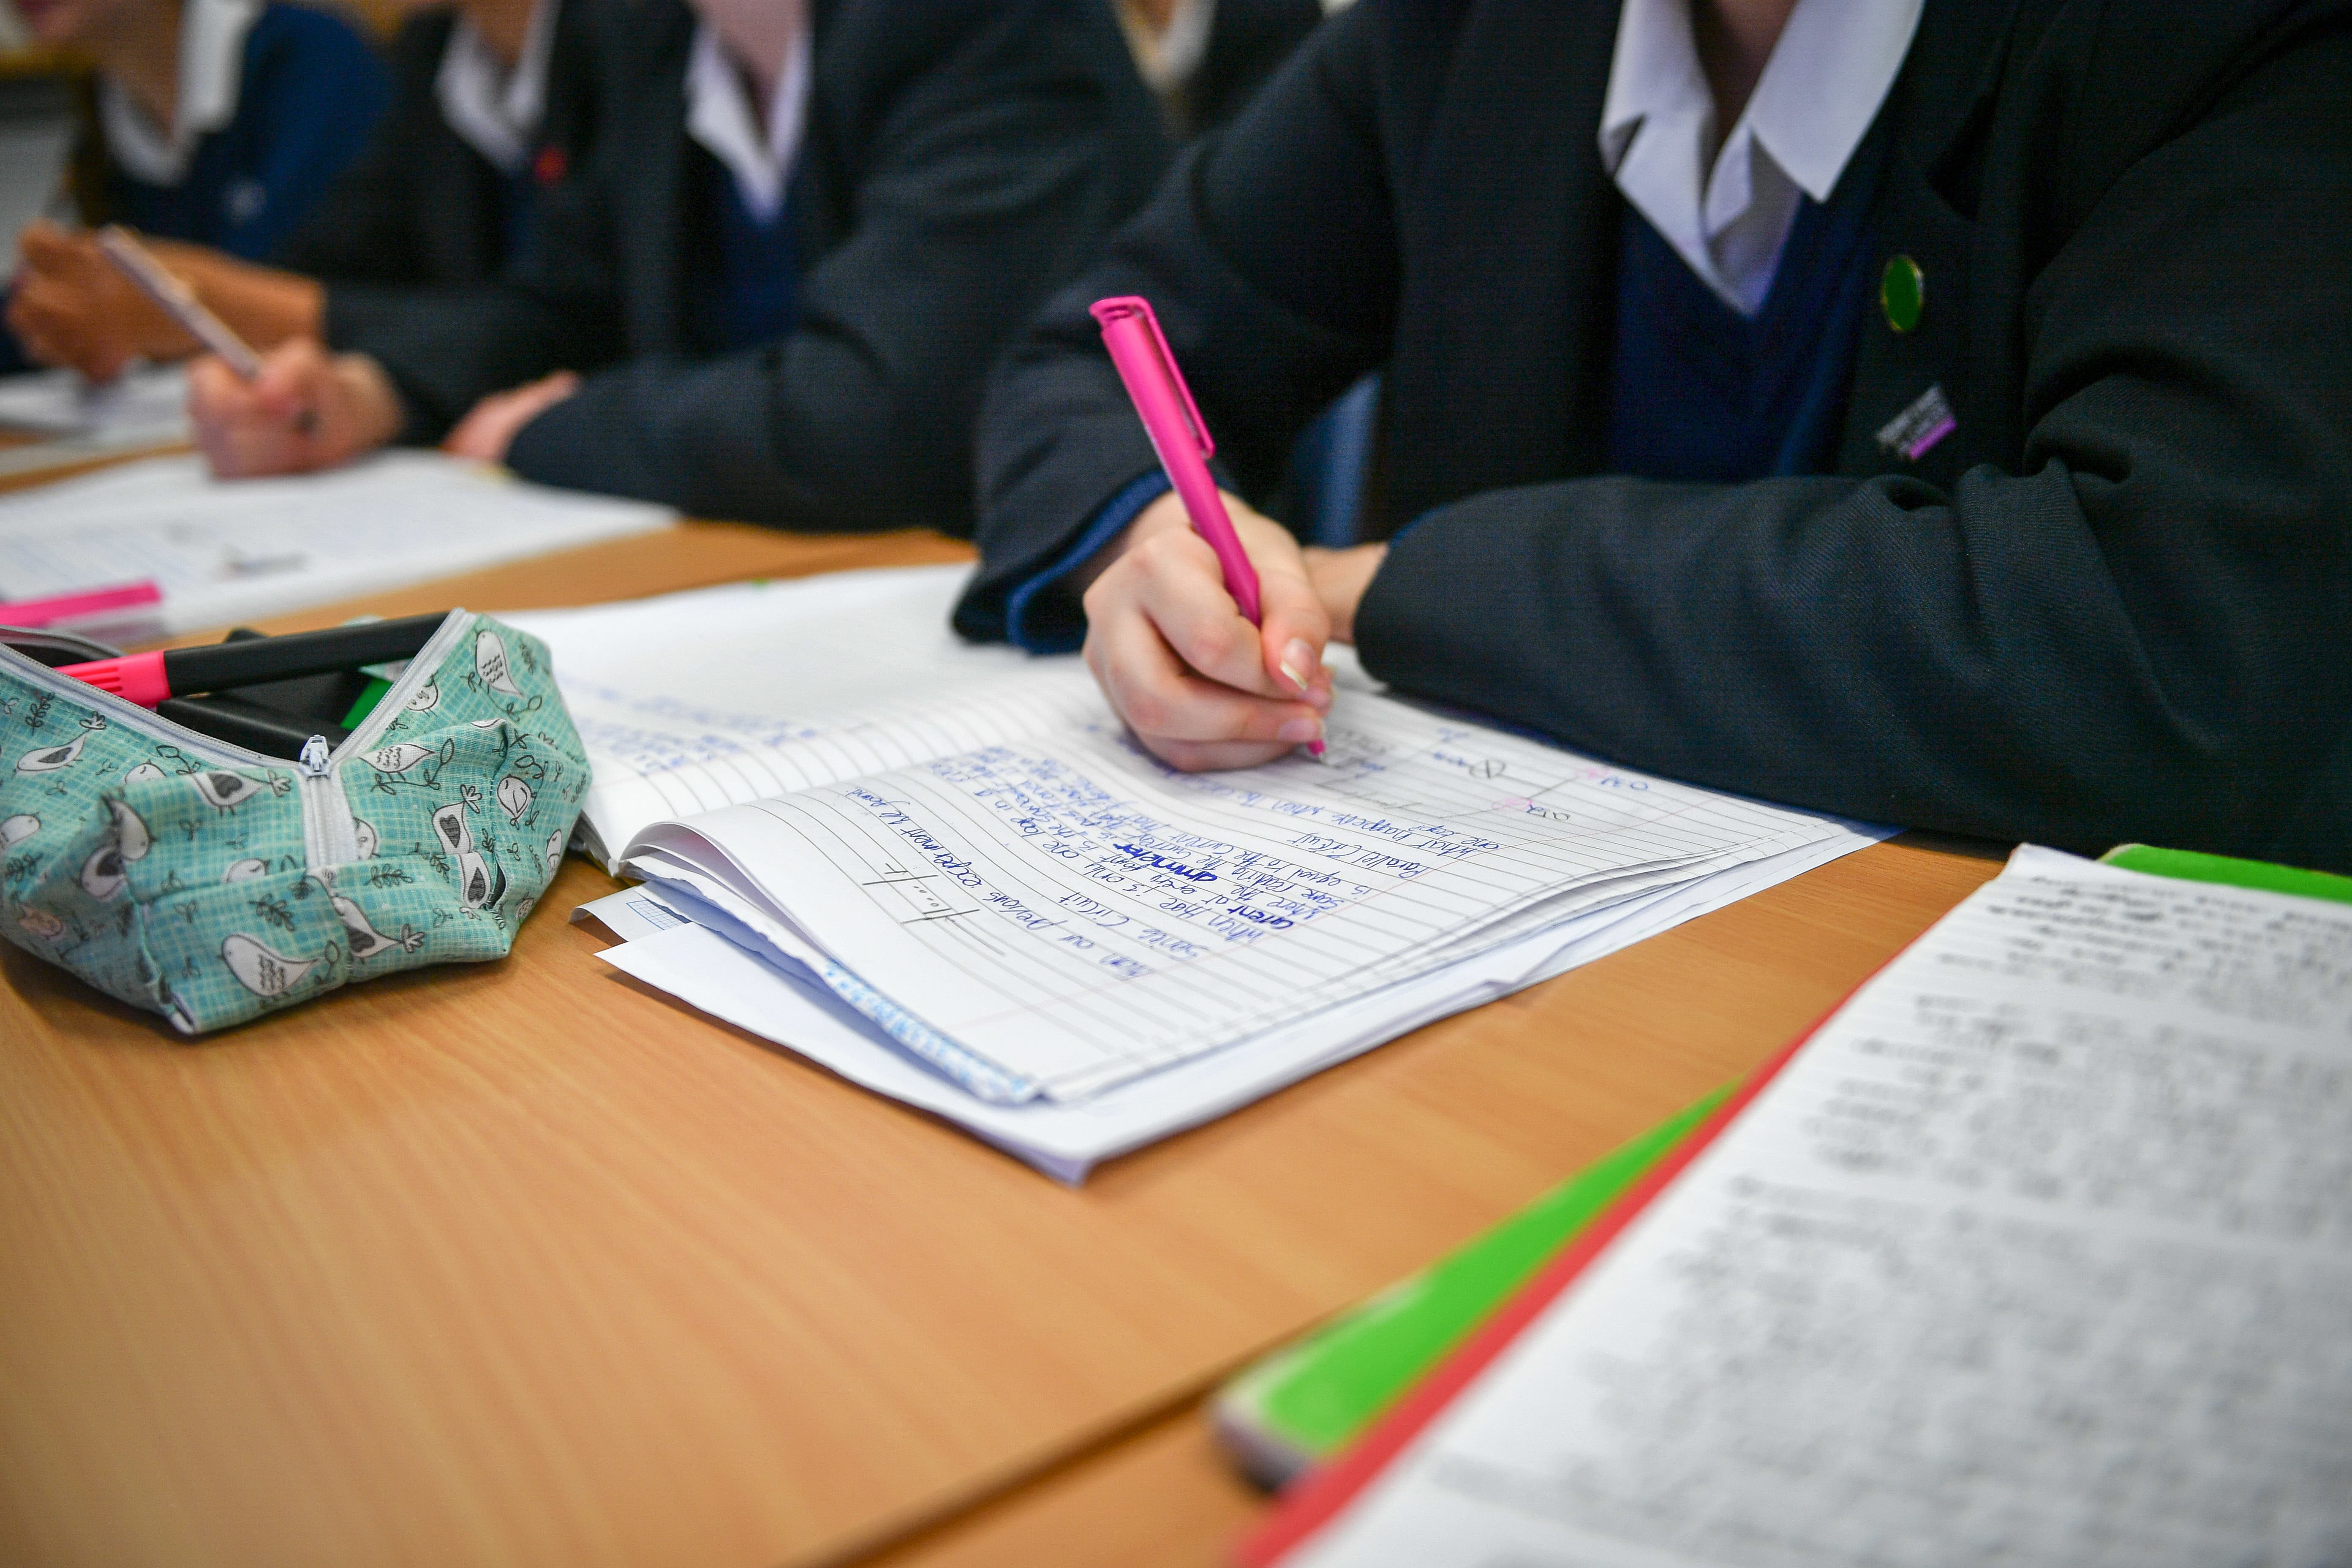 The overall number of applications for secondary school places in London dropped (Ben Birchall/PA)